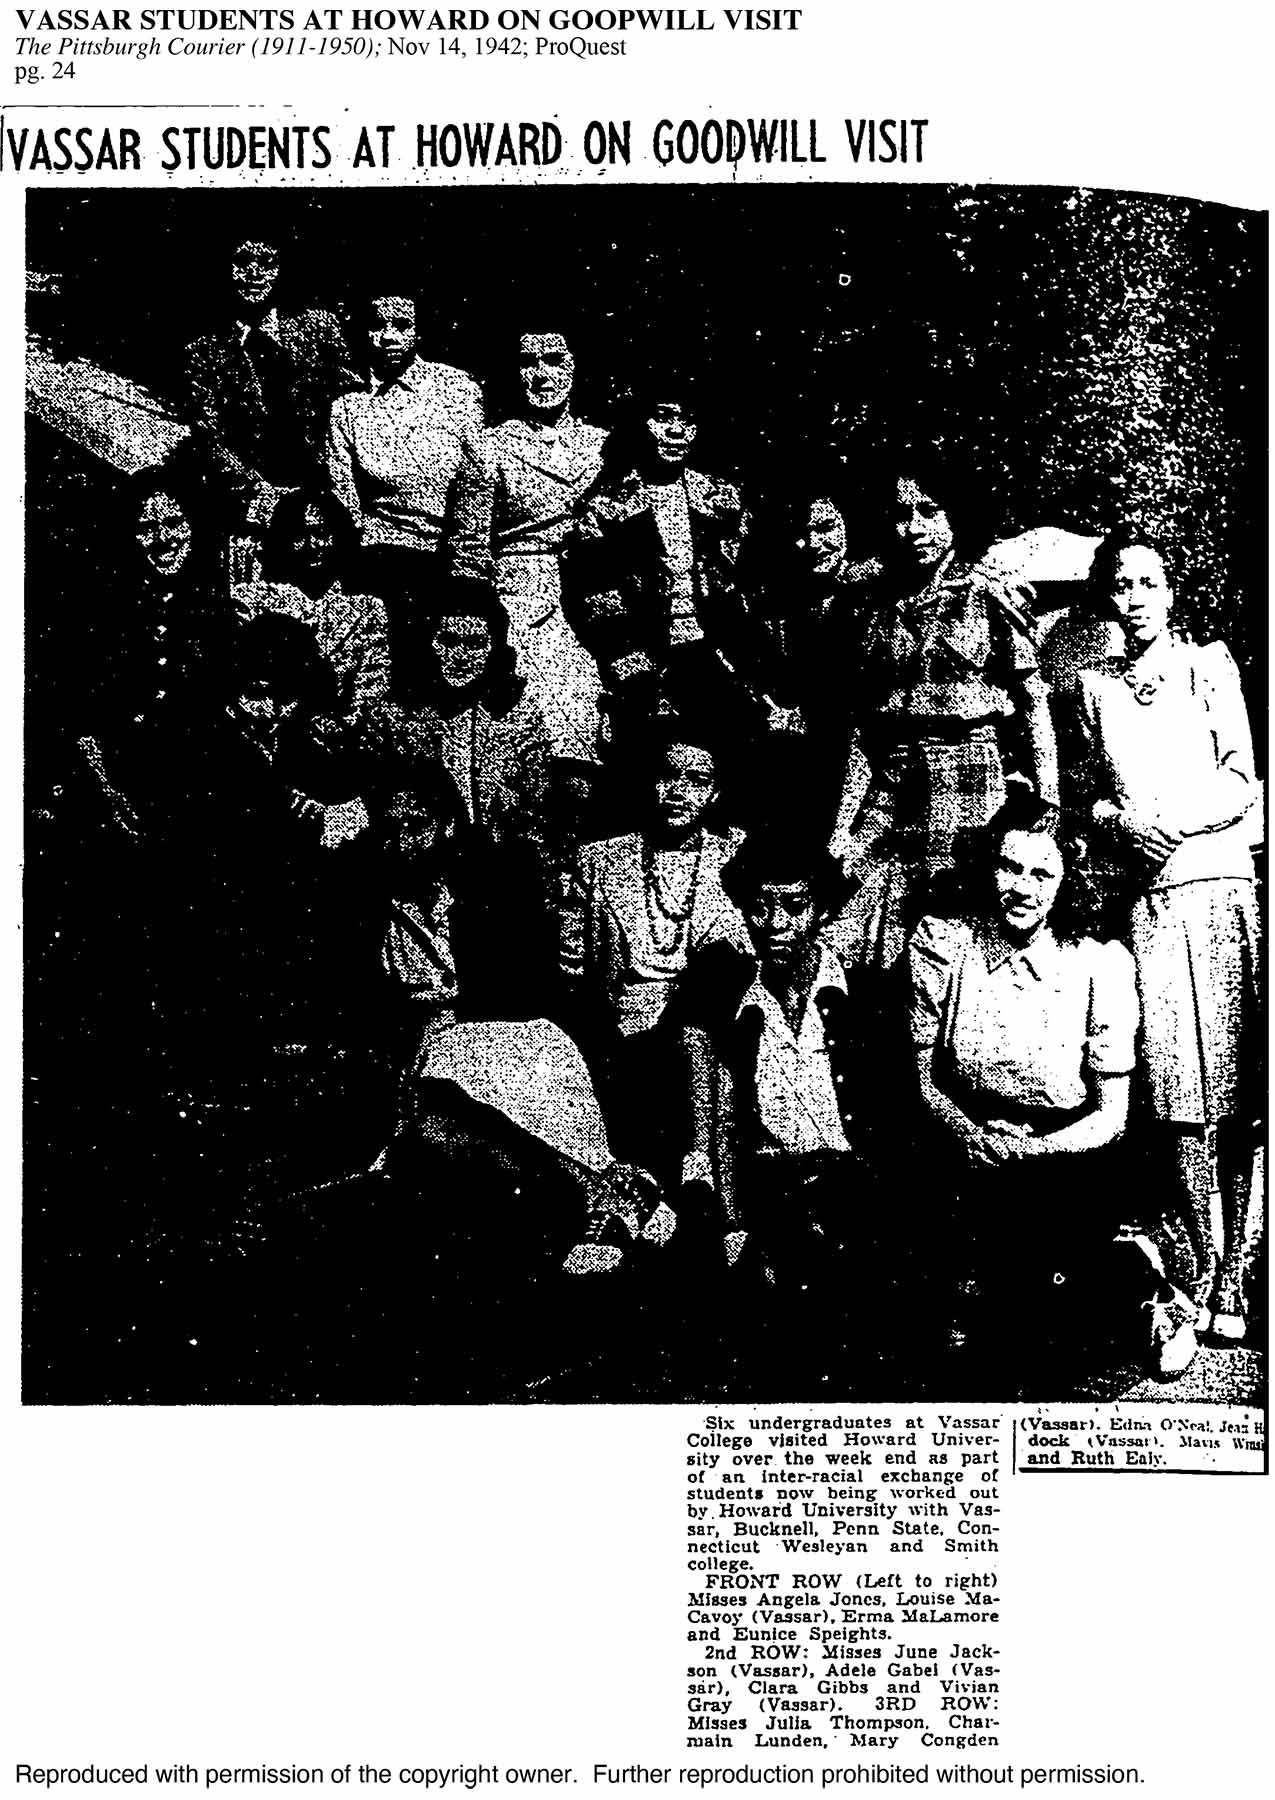 Original article scan for Vassar Students at Howard on Goodwill Visit; The Pittsburgh Courier (1911-1950); Nov 14, 1942; ProQuest pg. 24.